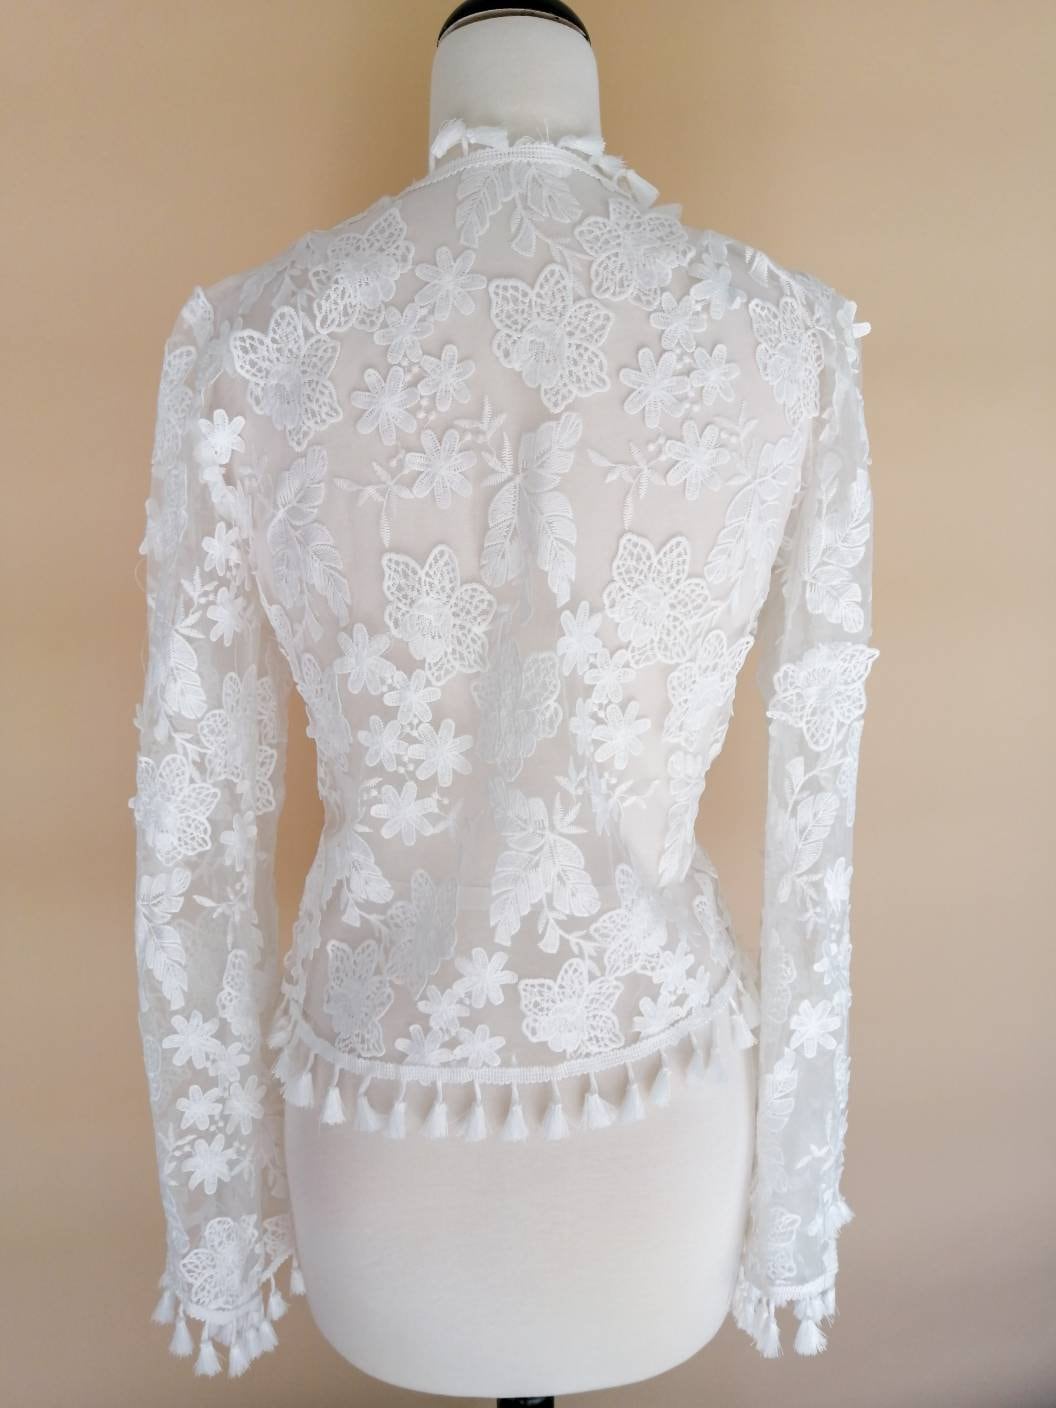 Minimalist Modern Lace Bridal Top Long Sleeve Bolero with 3D Flower Embroidered Lace Bridal Lace Top Separates with Long Sleeves